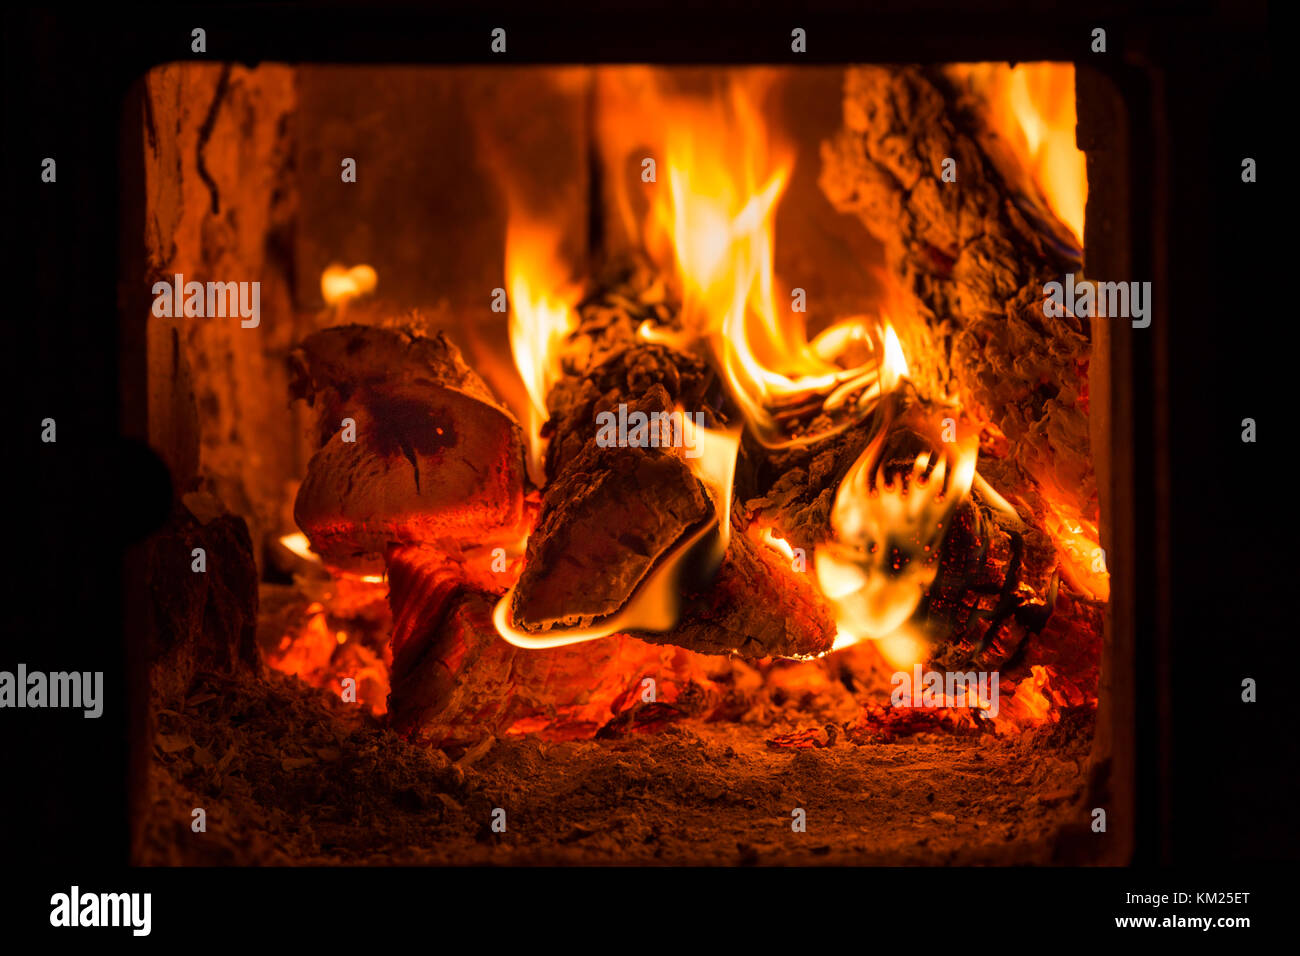 Fire and coals in brick fireplace furnace Stock Photo